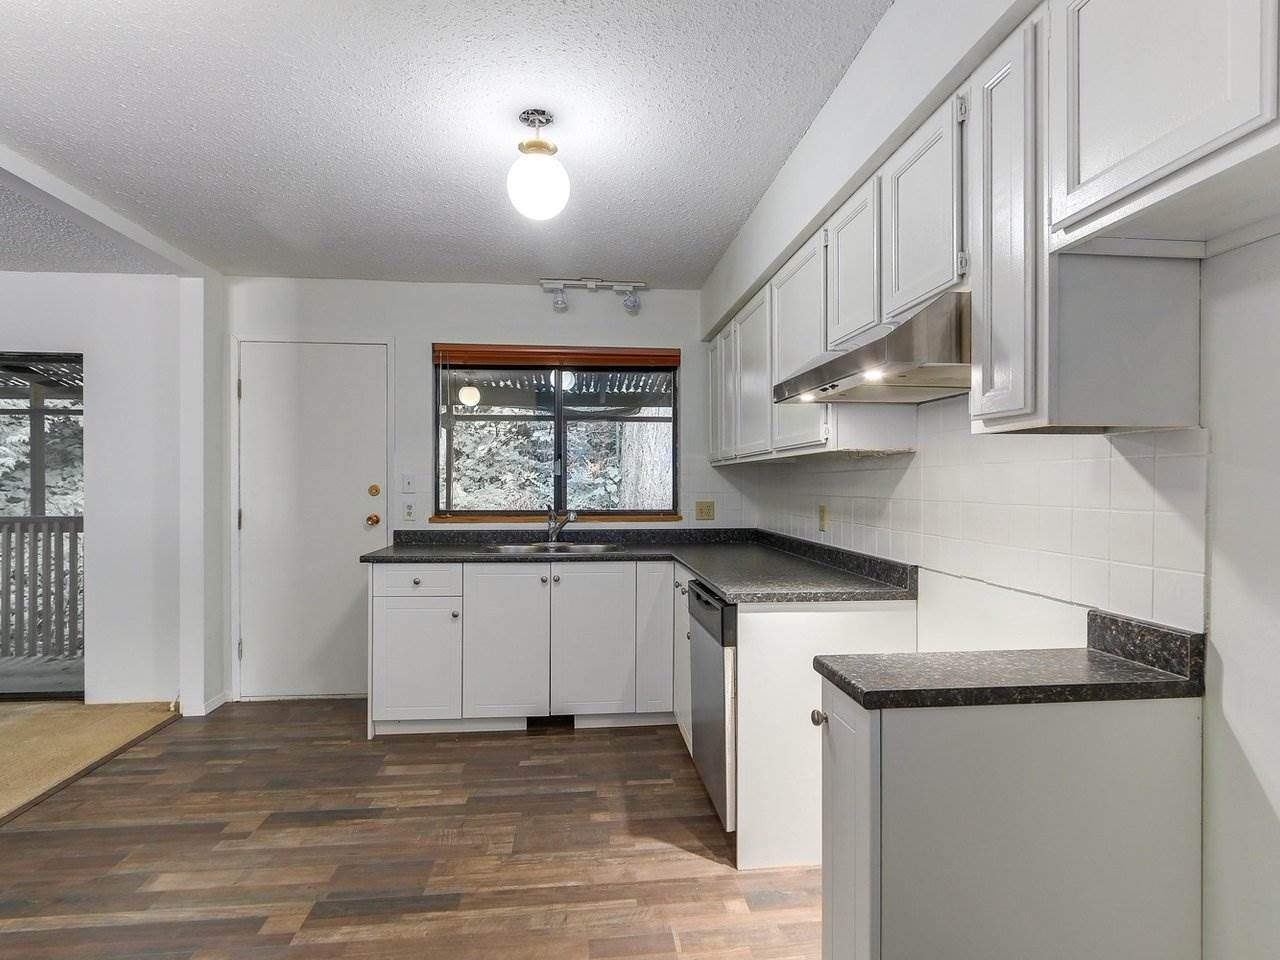 Photo 8: Photos: 2026 FLYNN Place in North Vancouver: Pemberton NV House for sale : MLS®# R2331925